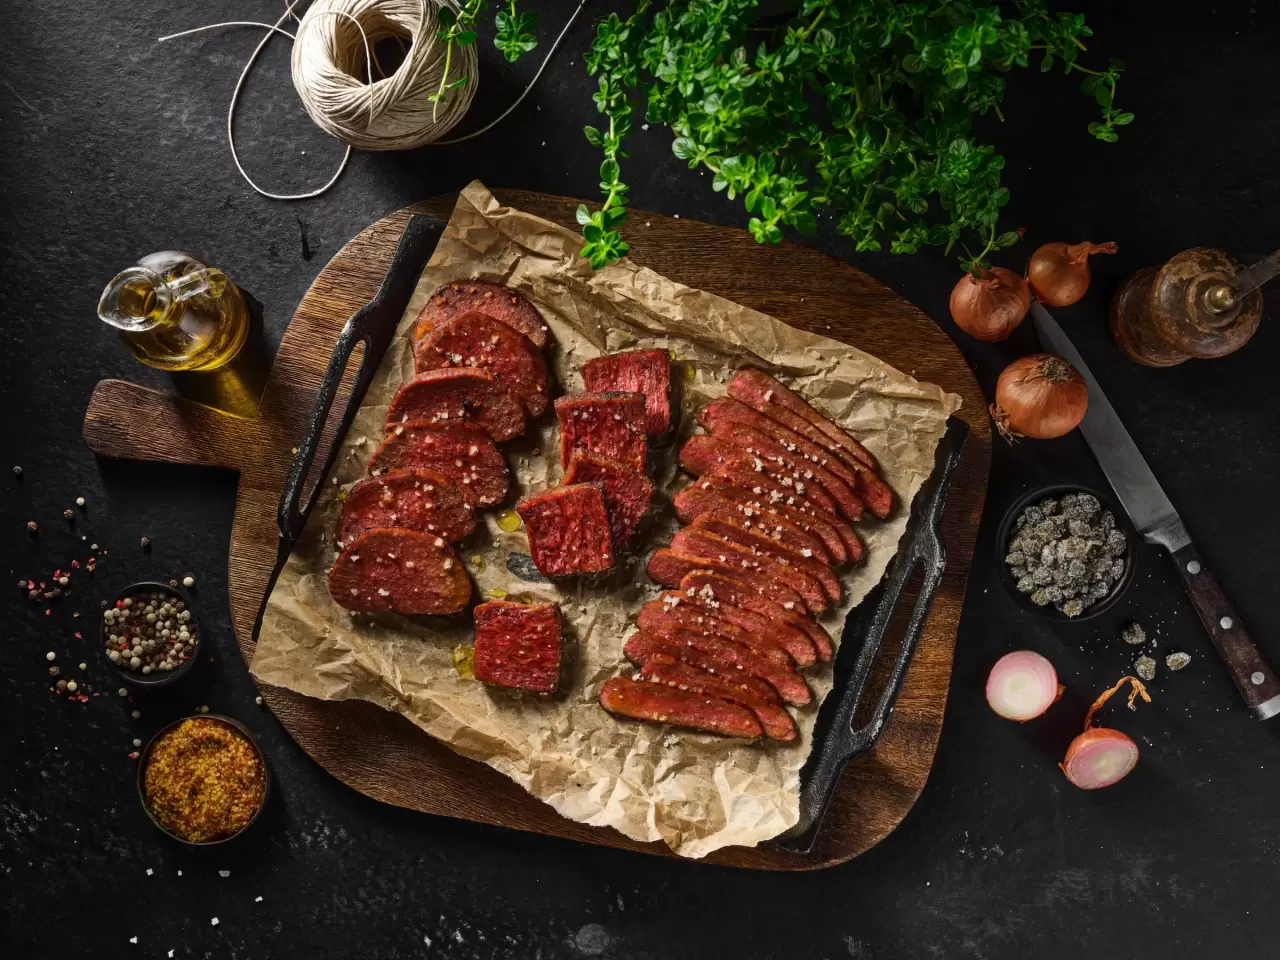 Redefine Meat unveils major New-Meat expansion with breakthrough premium cuts and first ever culinary-grade "Pulled Meat" category